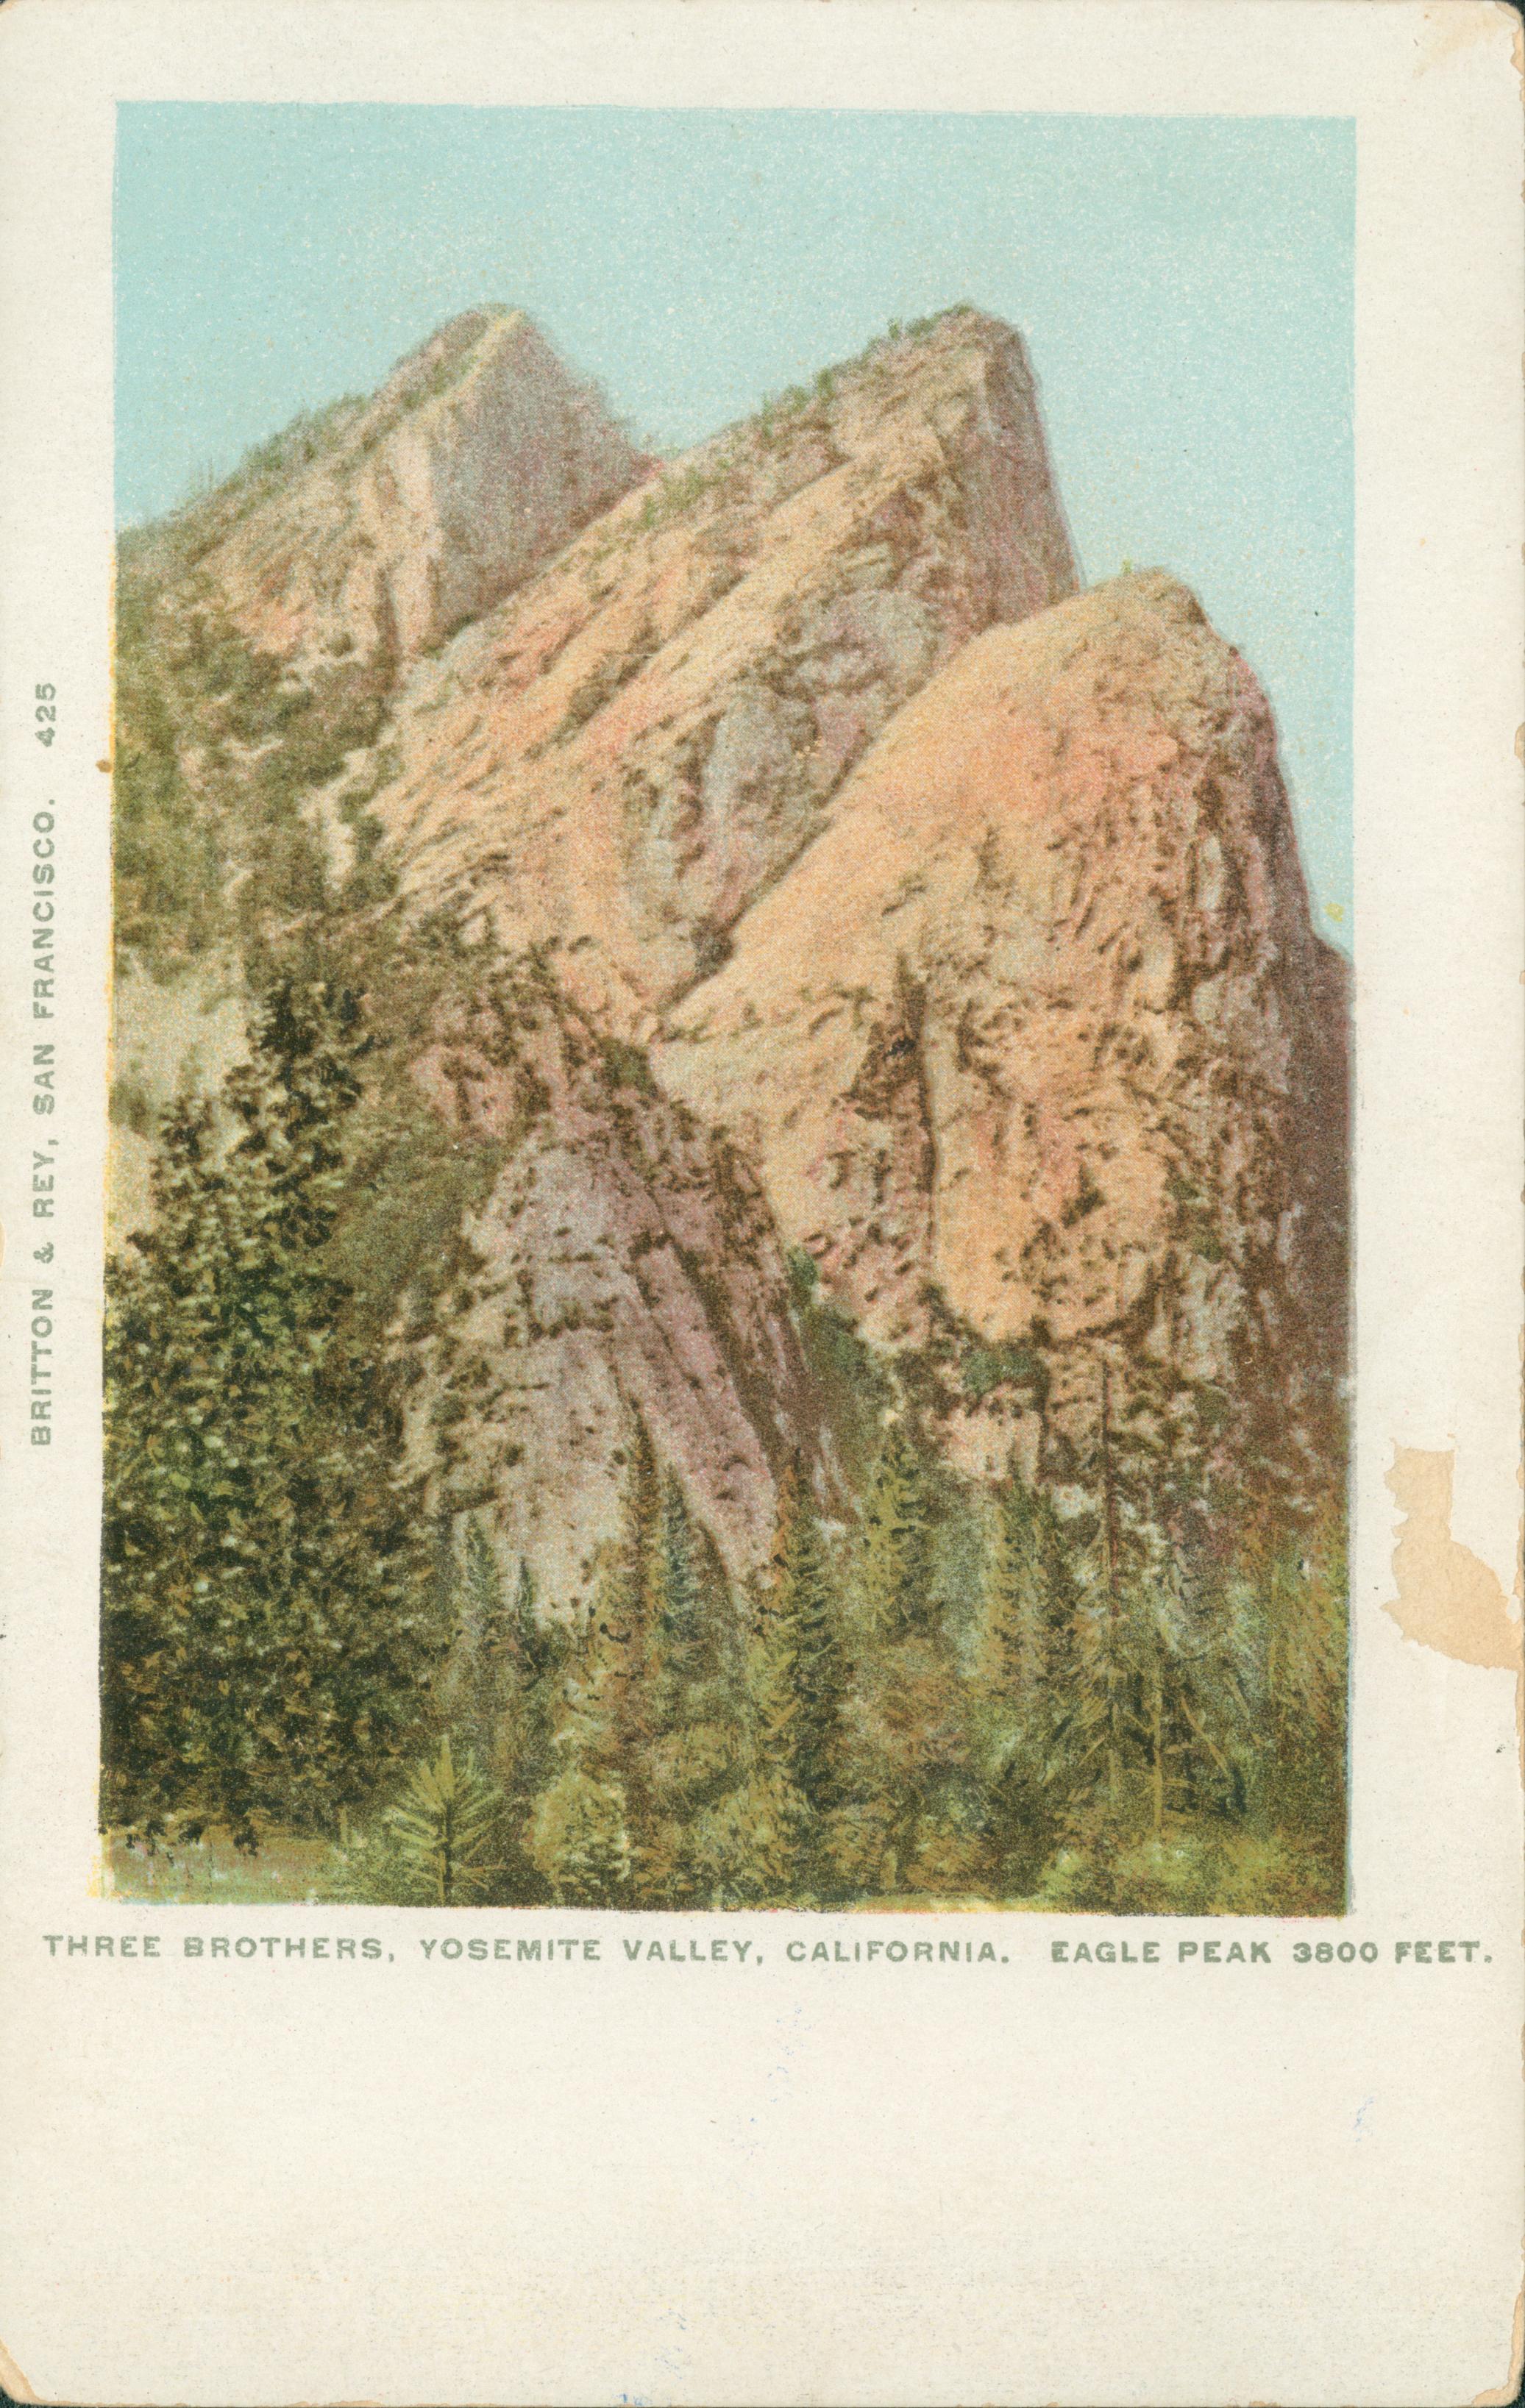 Shows the Three Brothers rock formation with trees in the foreground.